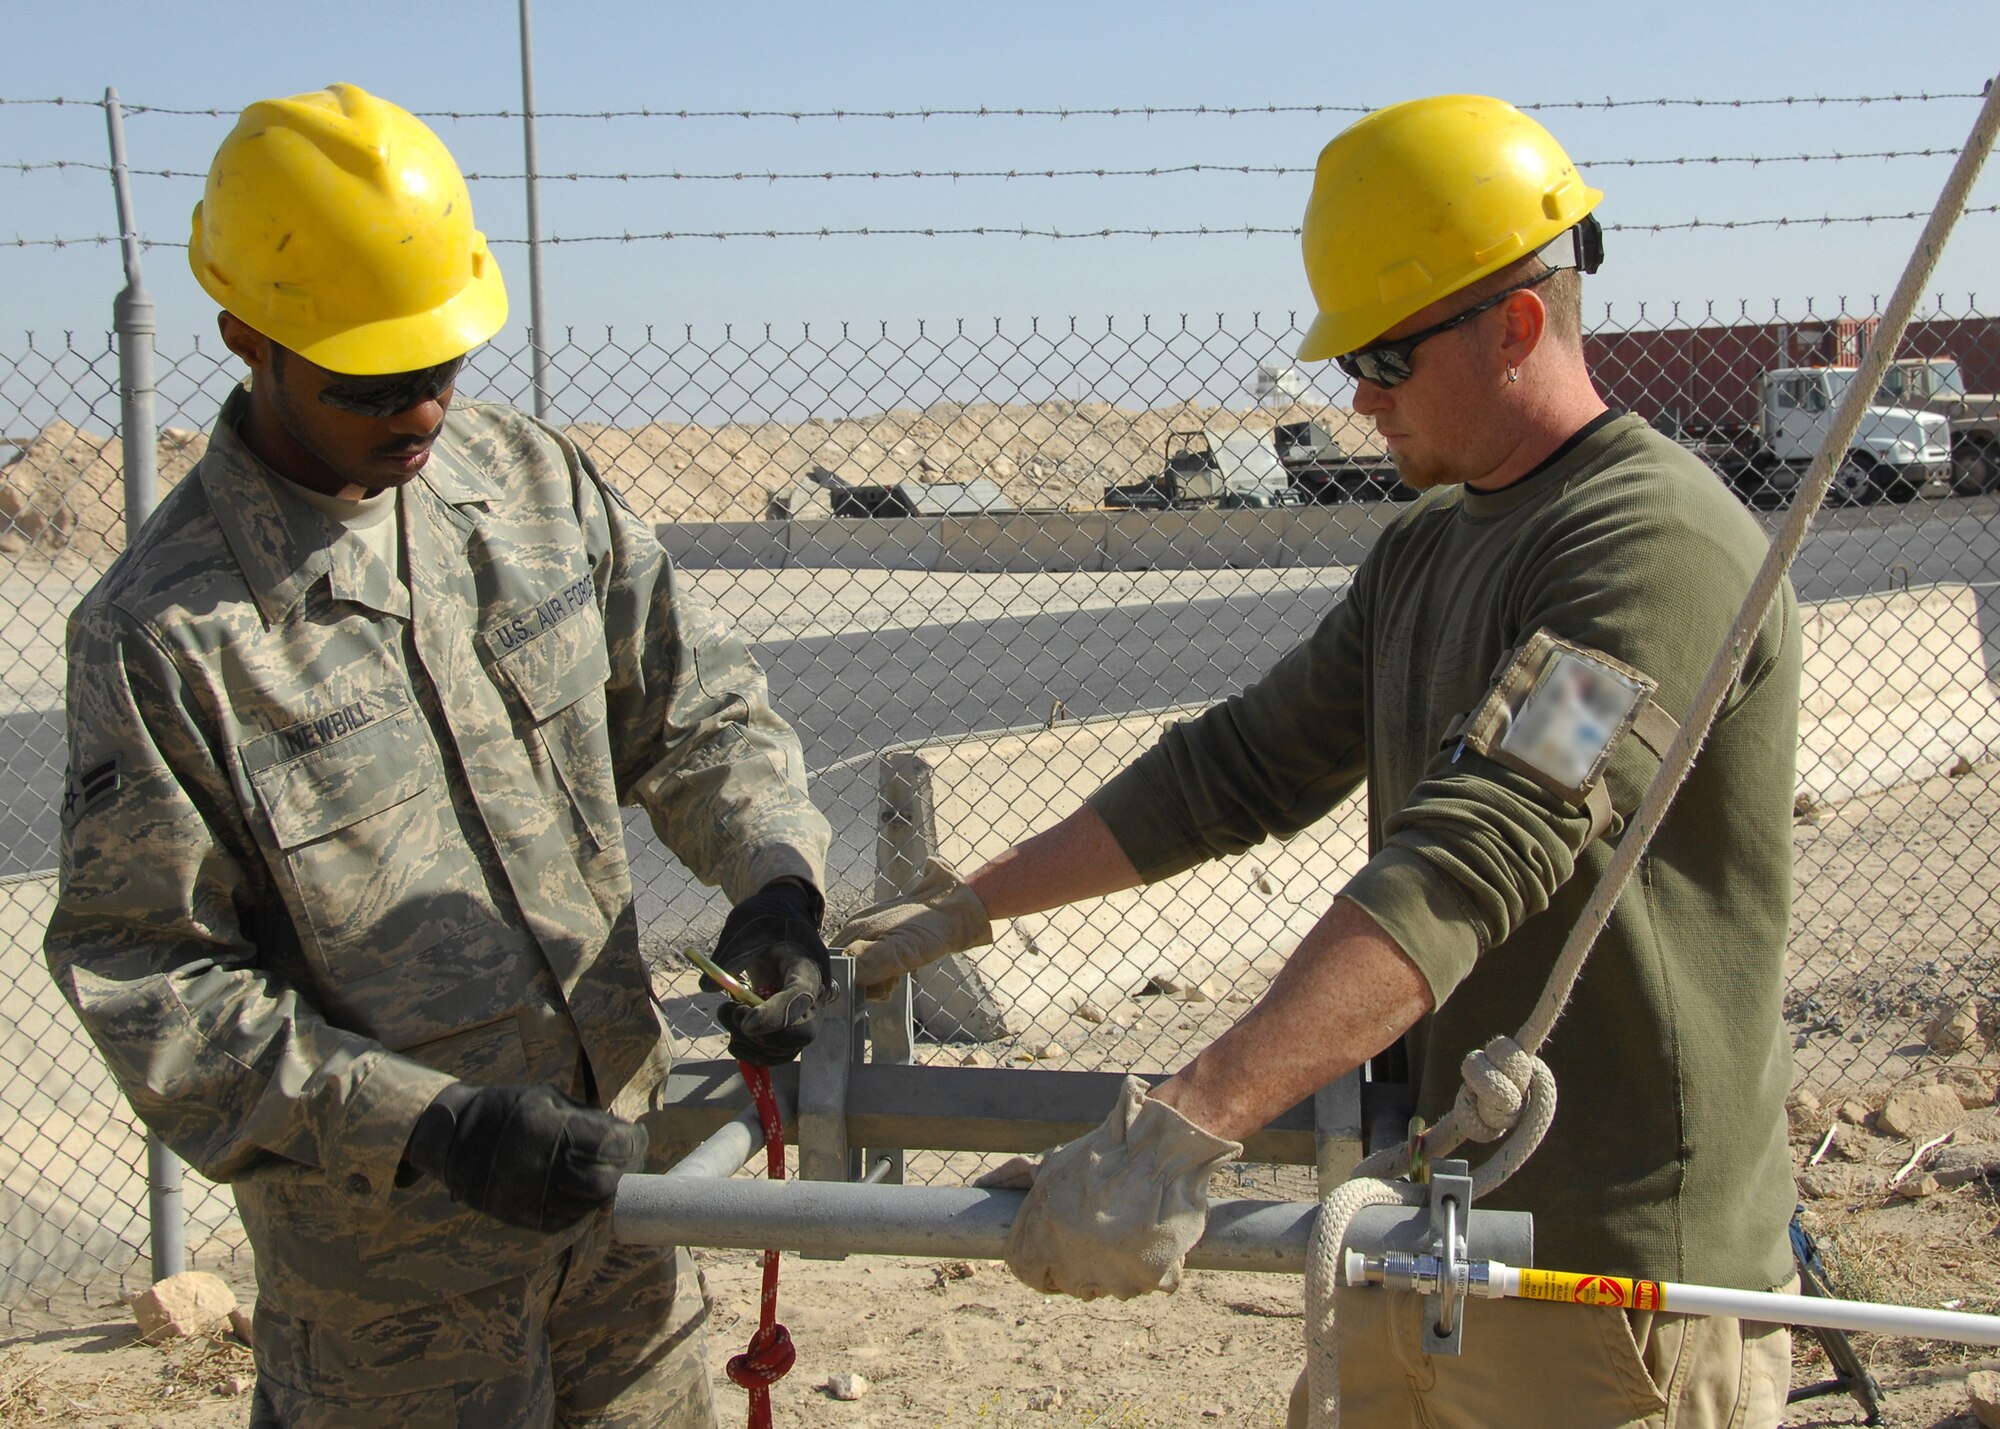 SOUTHWEST ASIA -- Airman 1st Class Delvon Newbill and Mr. Bobby Bezinque, 386th Expeditionary Communication Squadron Cable and Antenna Maintenance technicians, secure a Radio Over Internet Protocol (ROIP) antenna prior to hoisting it up a communications tower for installation on Dec. 15 at an air base in Southwest Asia. The 386th ECS Cable Maintenance shop provides command and control capabilities through installation, maintenance, fault isolation and reconstitution of fixed cable and wireless distribution systems, local area networks and wide area networks in support of tactical and strategic operations. Airman Newbill is deployed from Malmstrom Air Force Base, Mont. (U.S. Air Force illustration/Tech. Sgt. Raheem Moore)